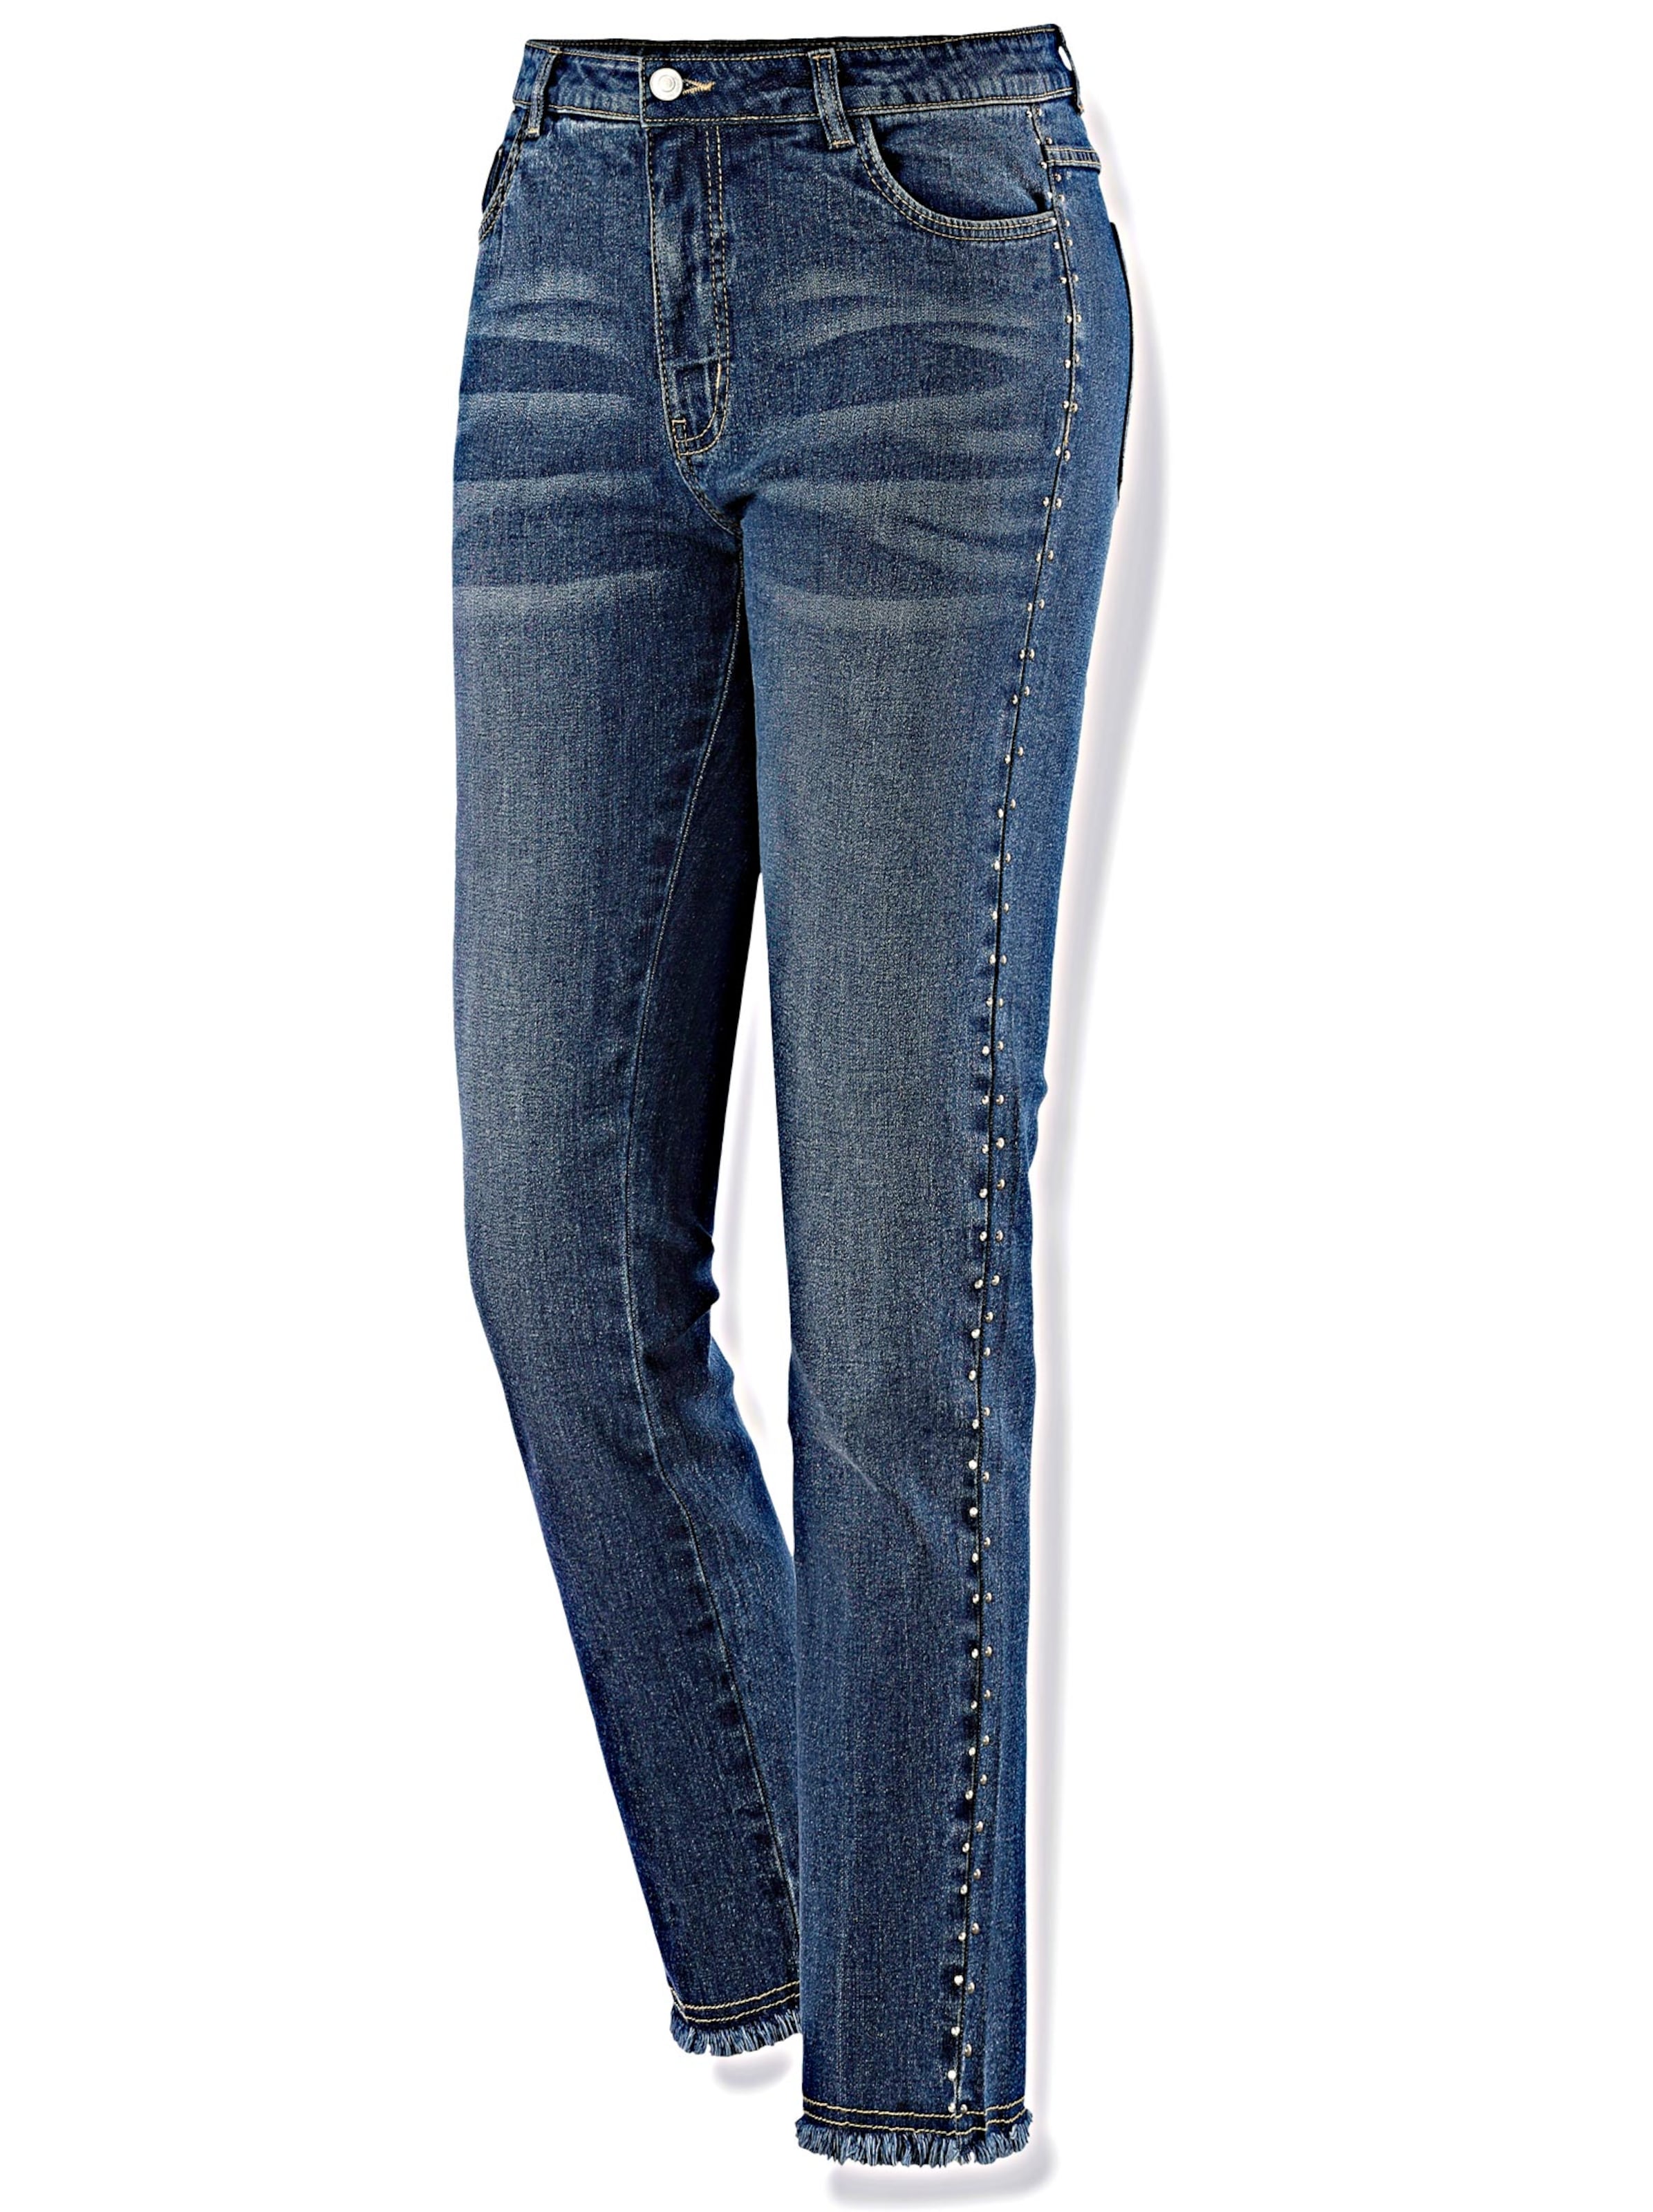 Damenmode Jeans 7/8-Jeans in blue-stone-washed 